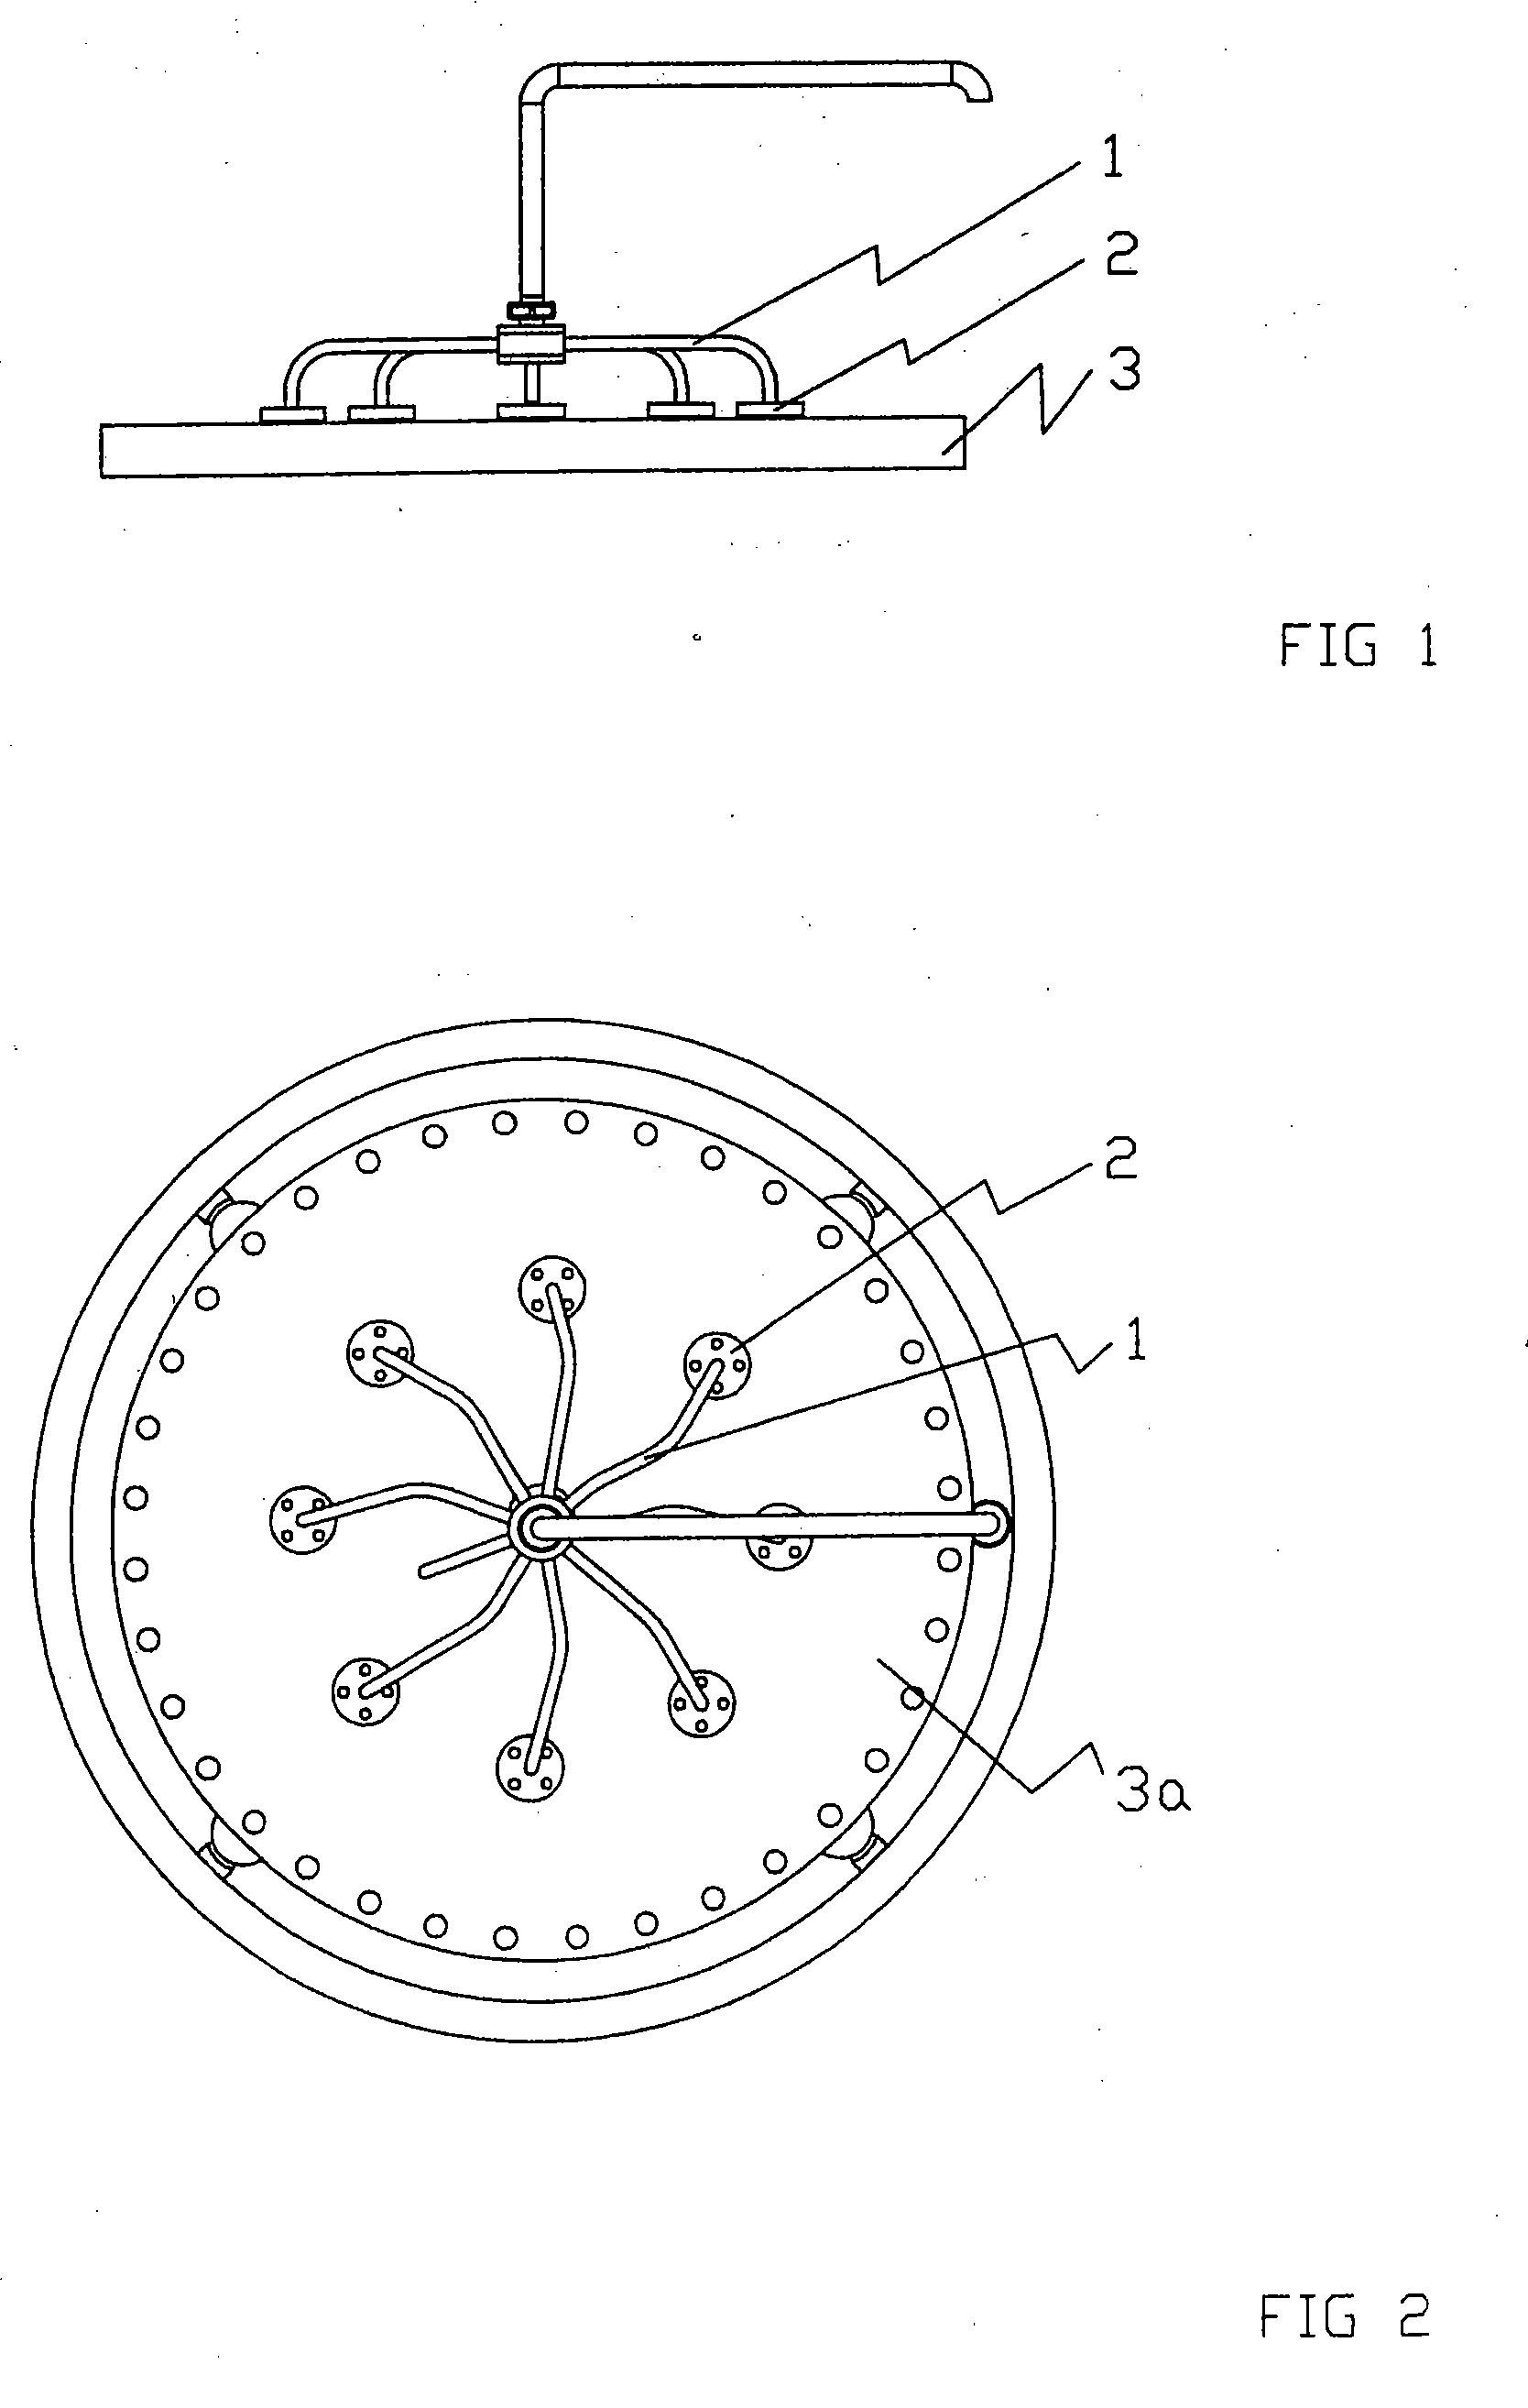 Distributing or Collecting Device